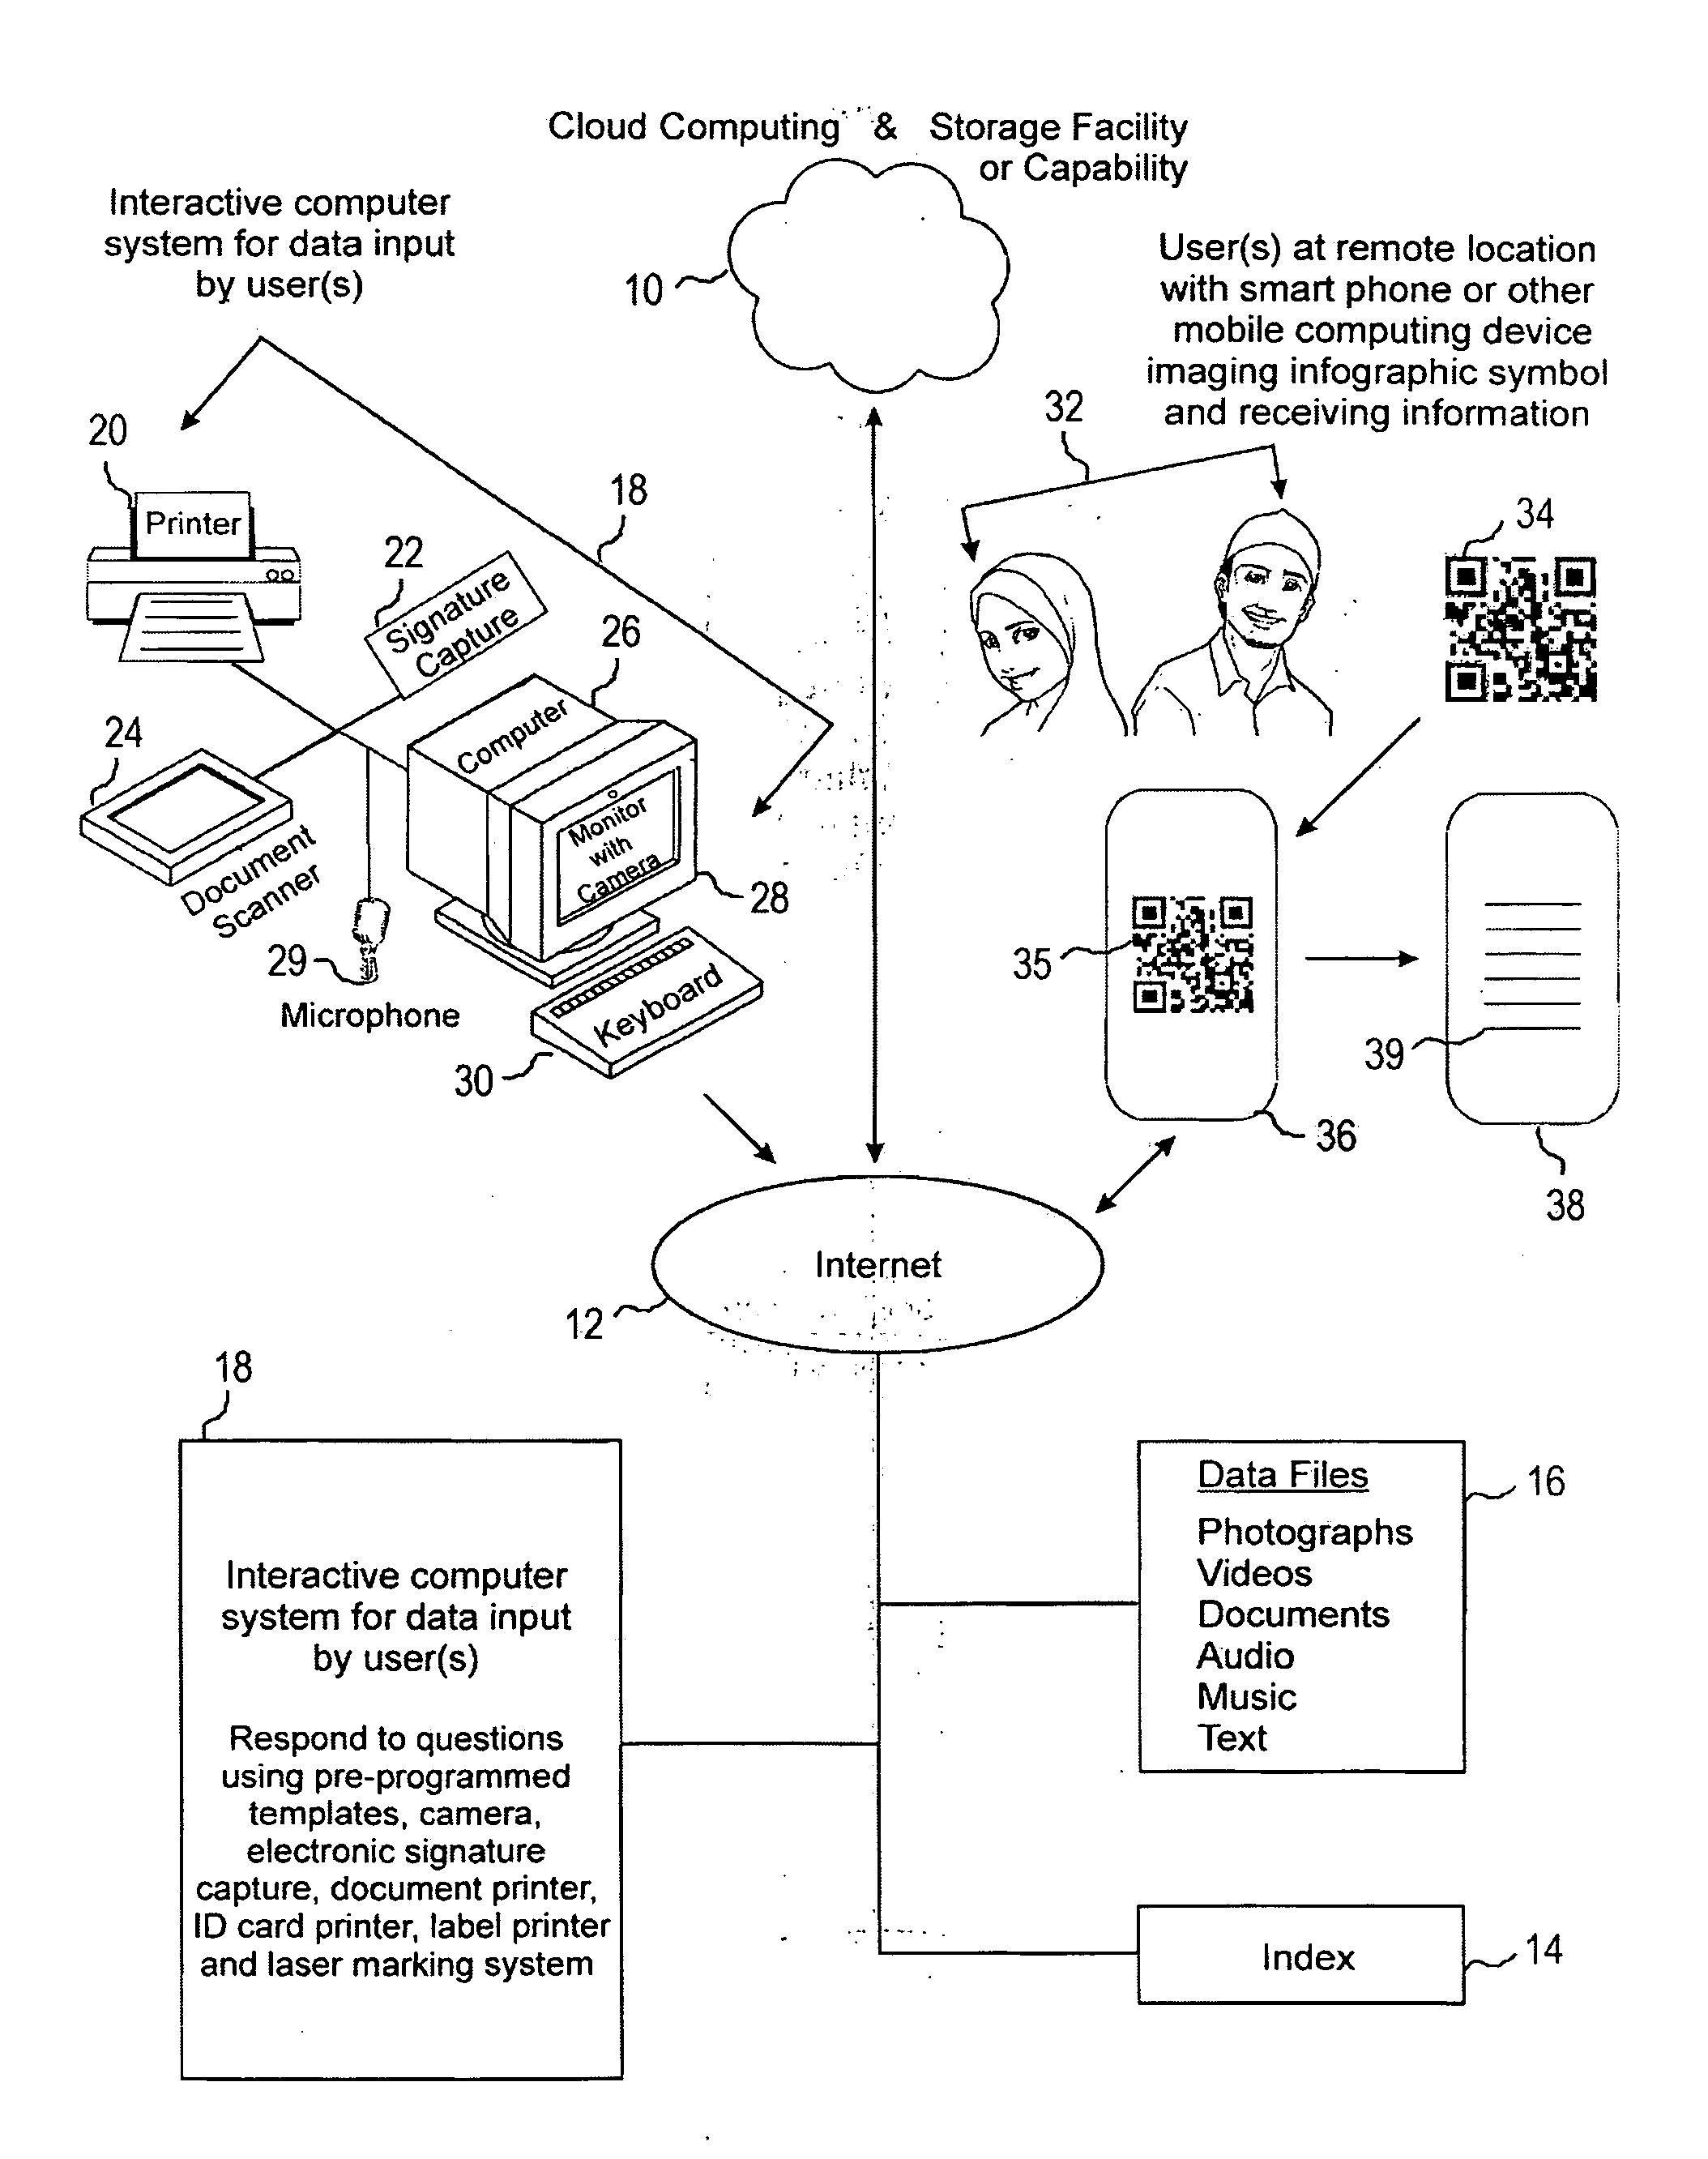 Systems and methods for the creation, transmission and storage of information and subsequent retrieval by a user